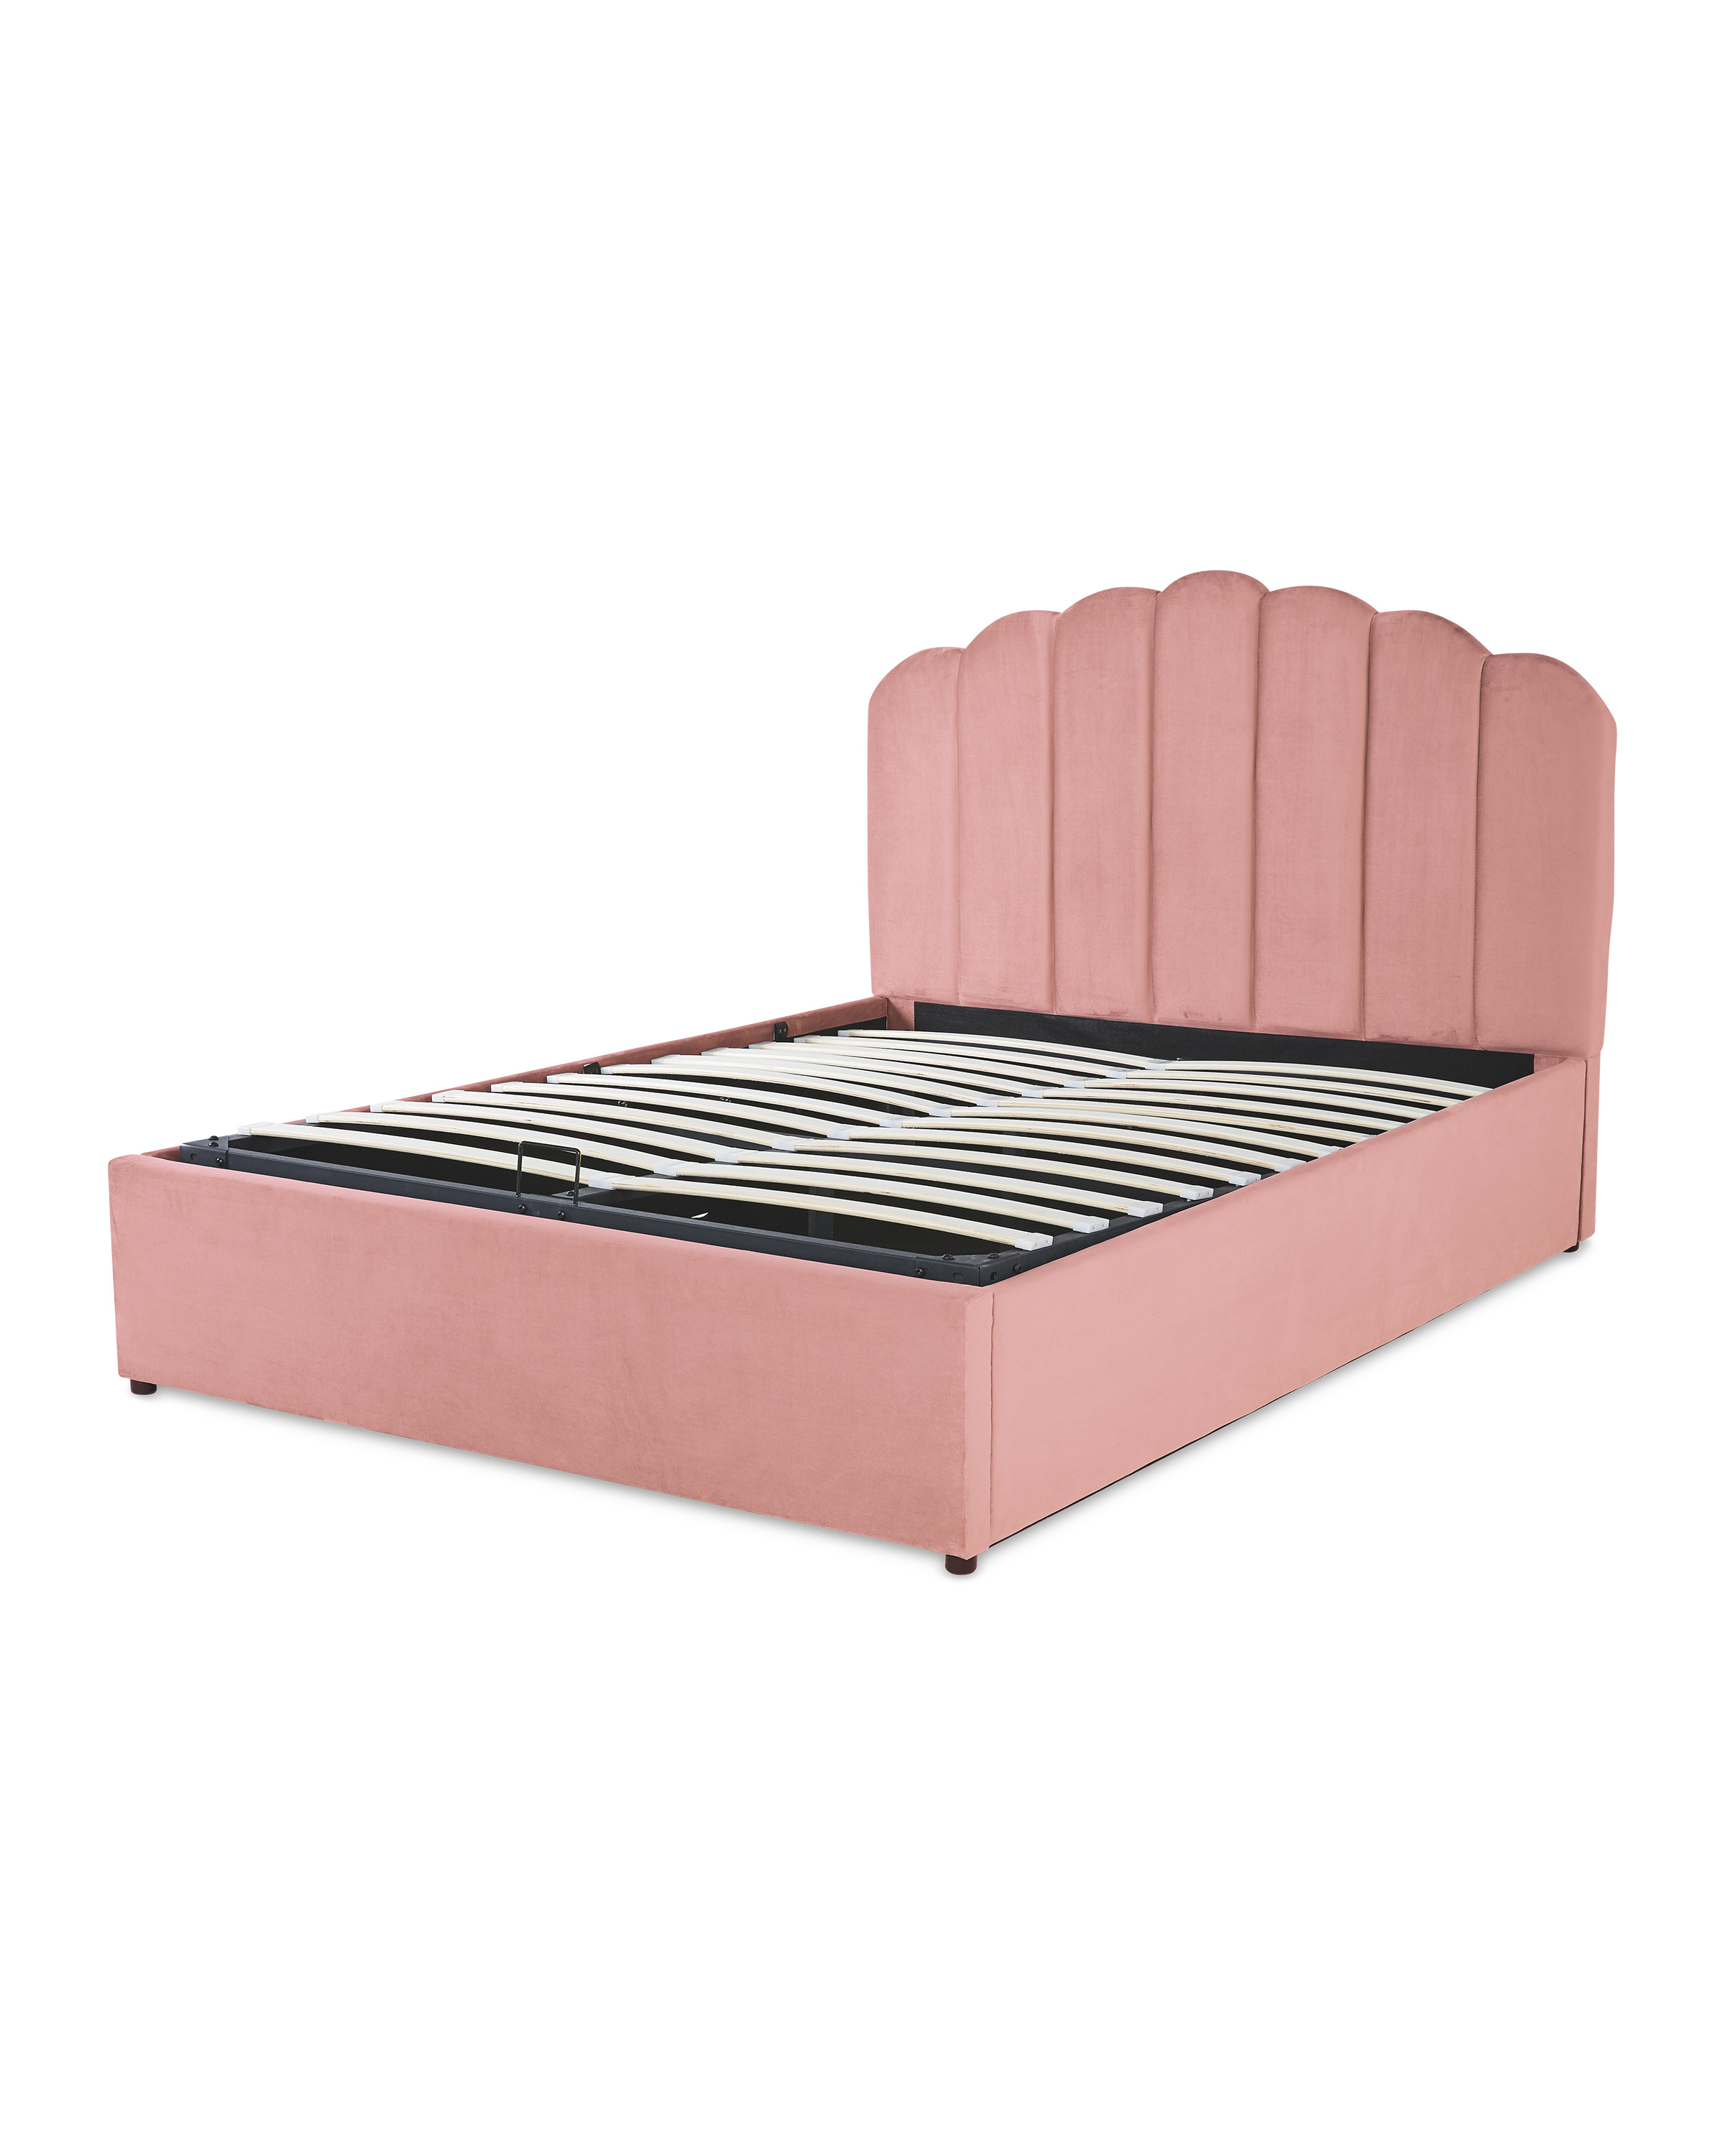 Pink King Size Ottoman Storage Bed, Pink King Size Bed Frame